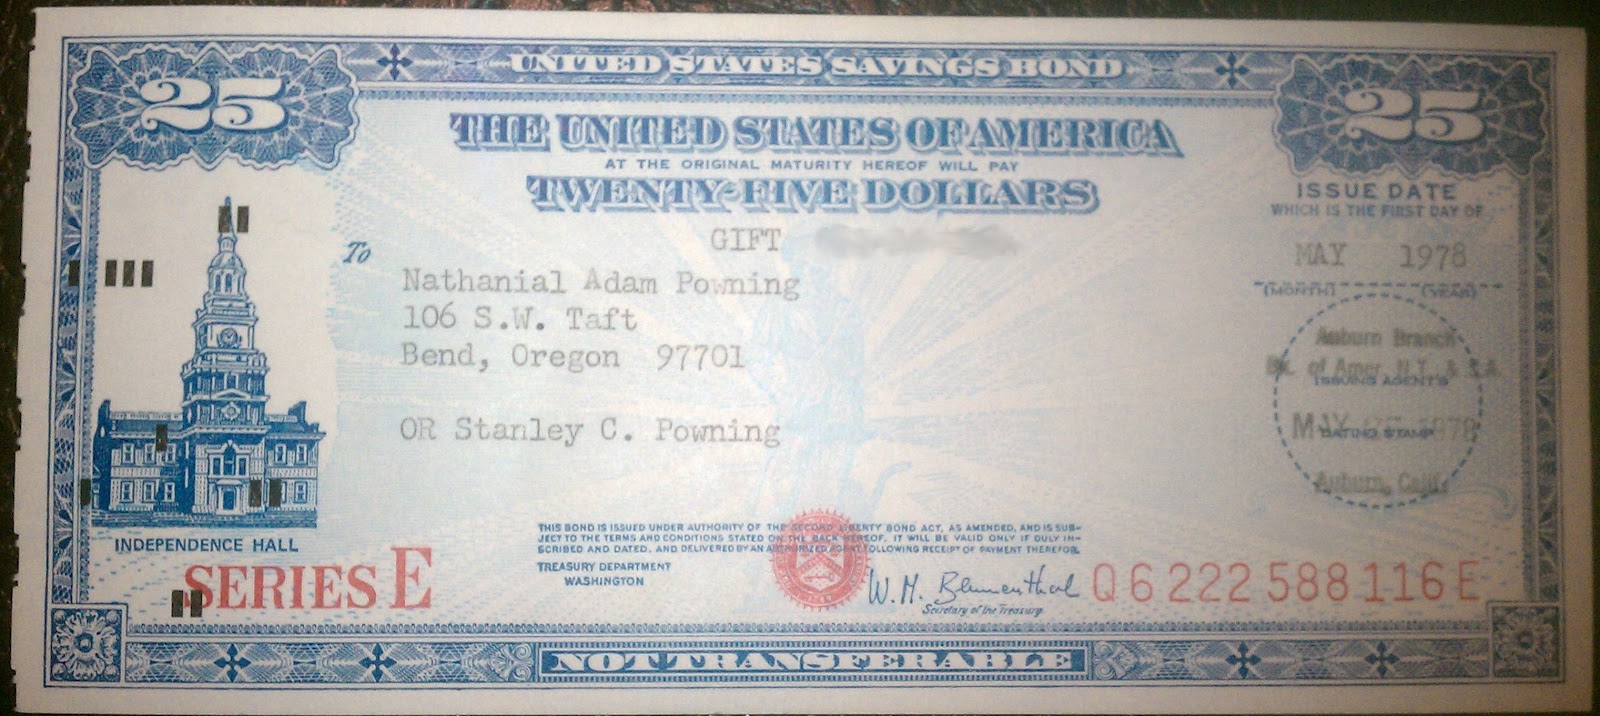 How Long For Savings Bonds To Mature 106